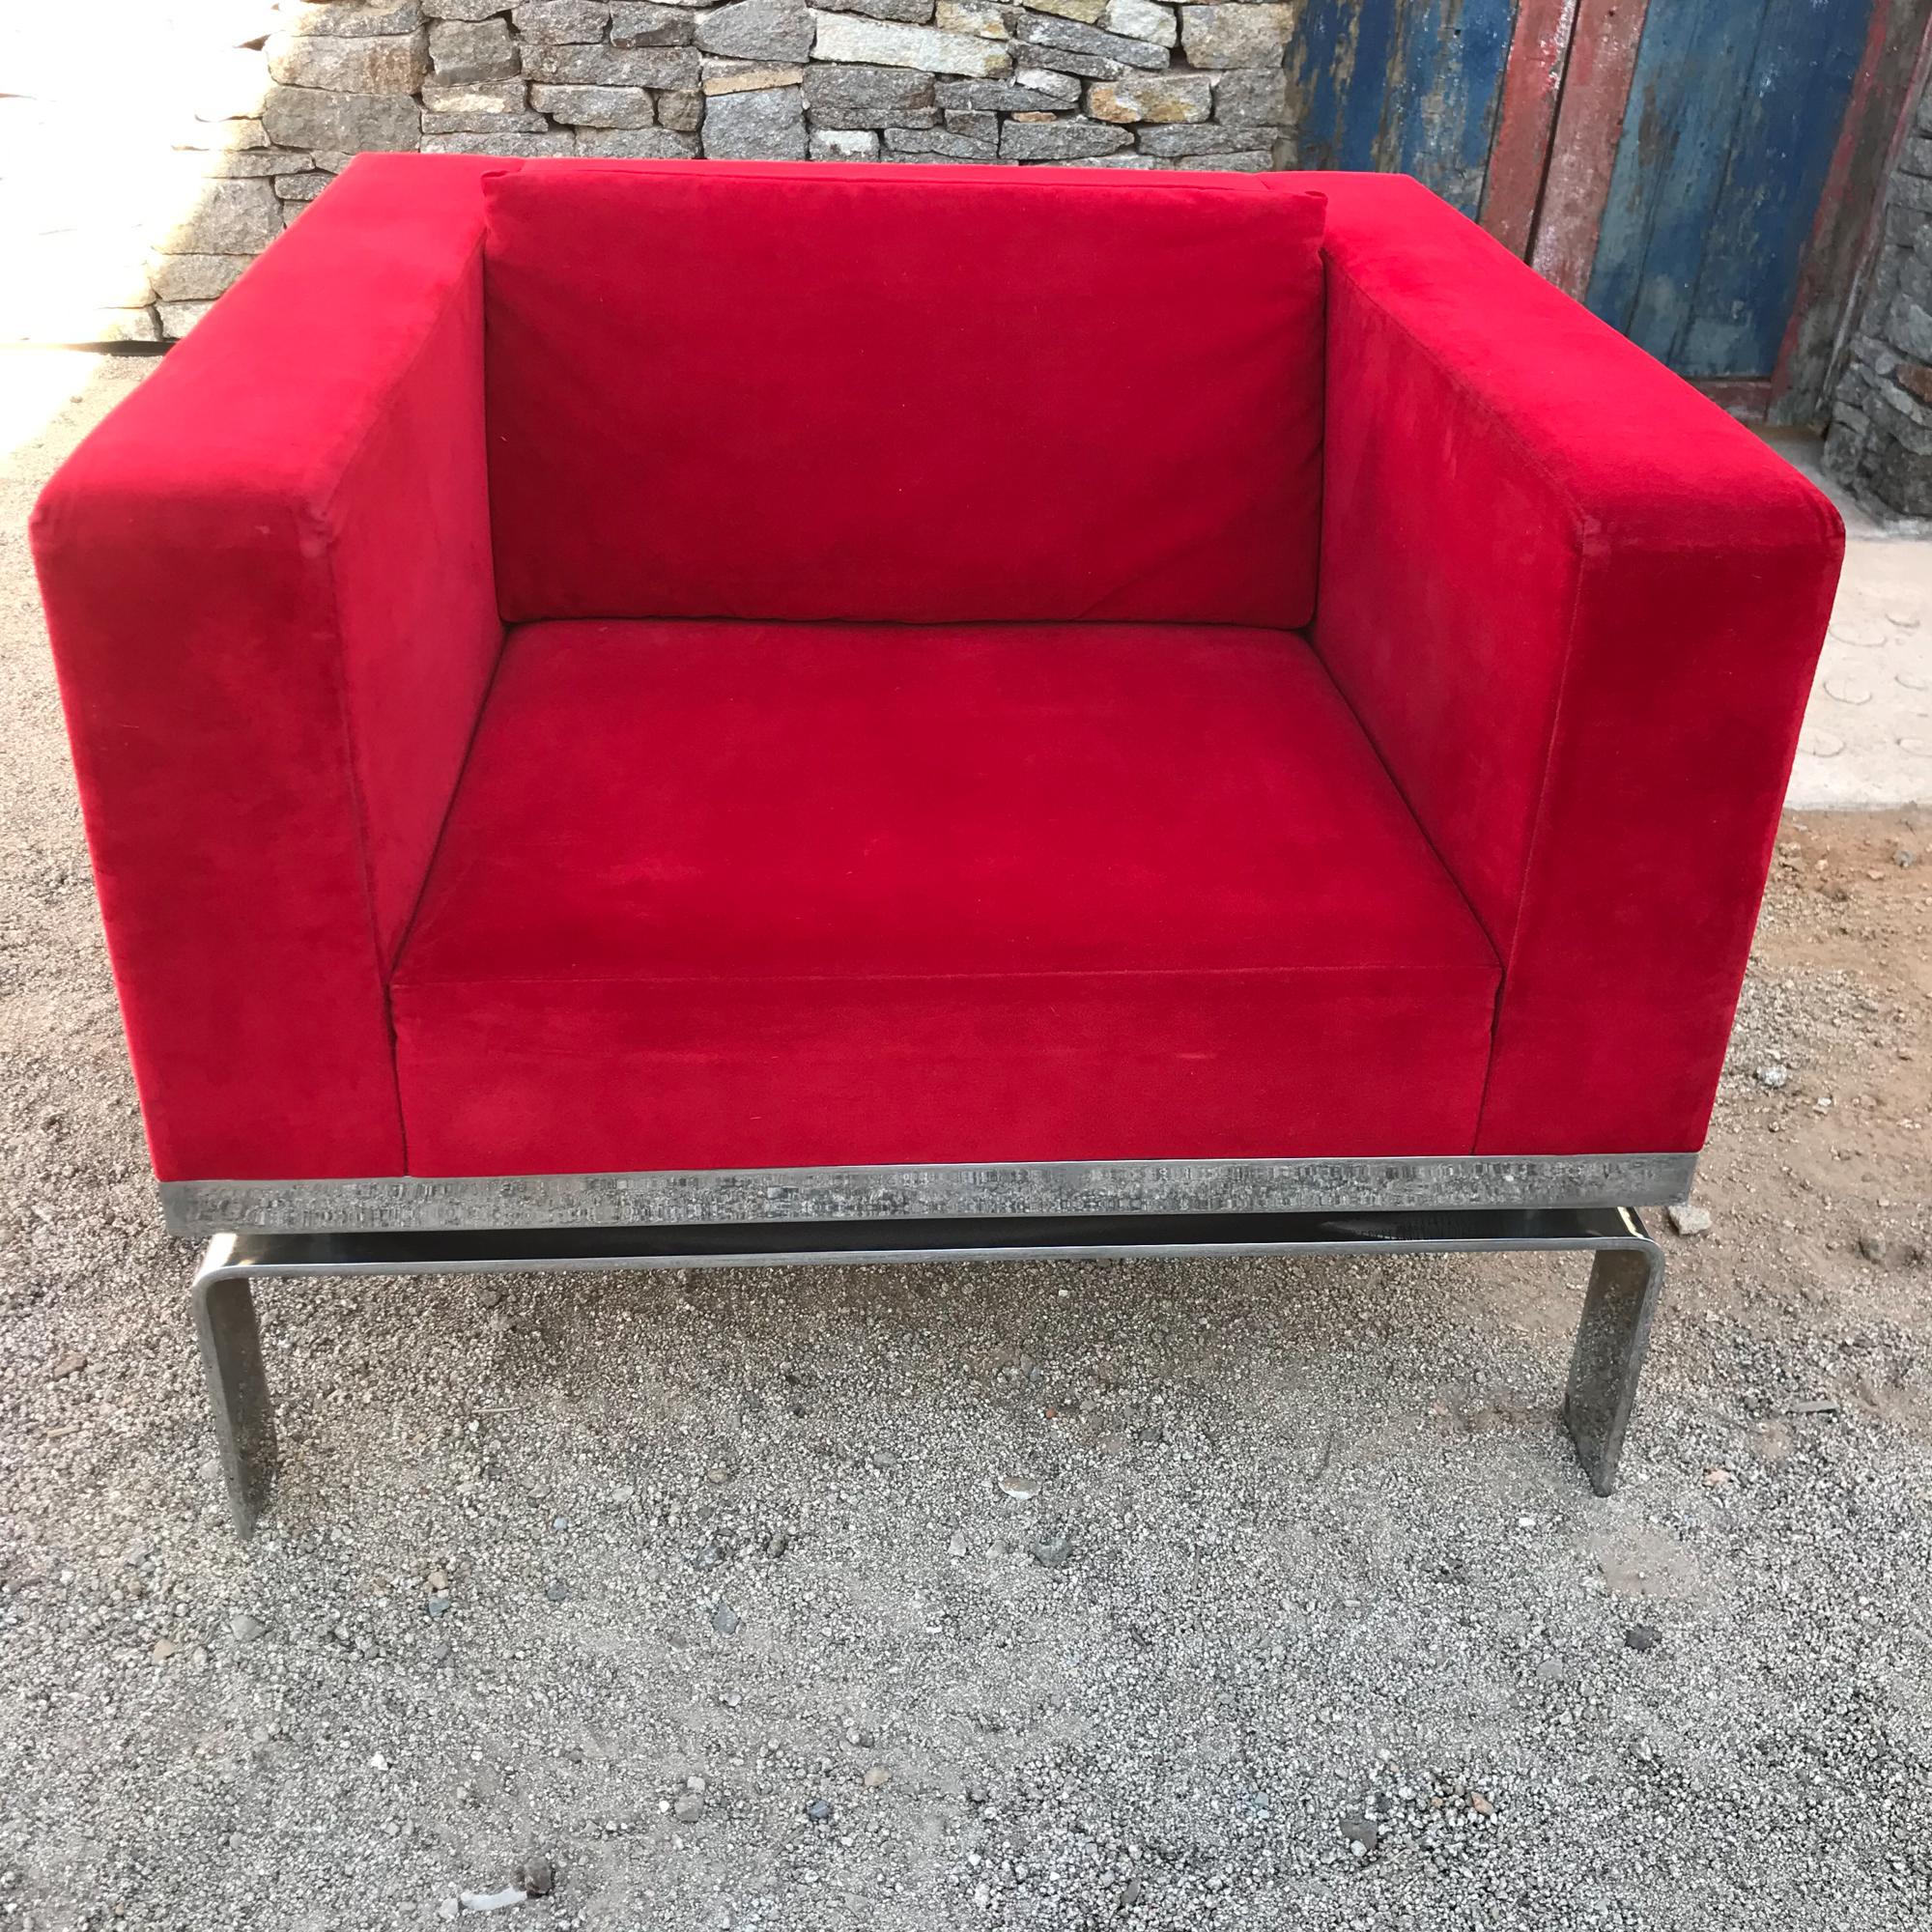 Club Chair
Fabulously Modern Contemporary Chrome Lounge Chair in an elegant Red by designers Collin Burry & Terry Walker for Martin Brattrud of California
Reminiscent of Milo Baughman midcentury design.
Chrome Plated Steel, Original Upholstery in